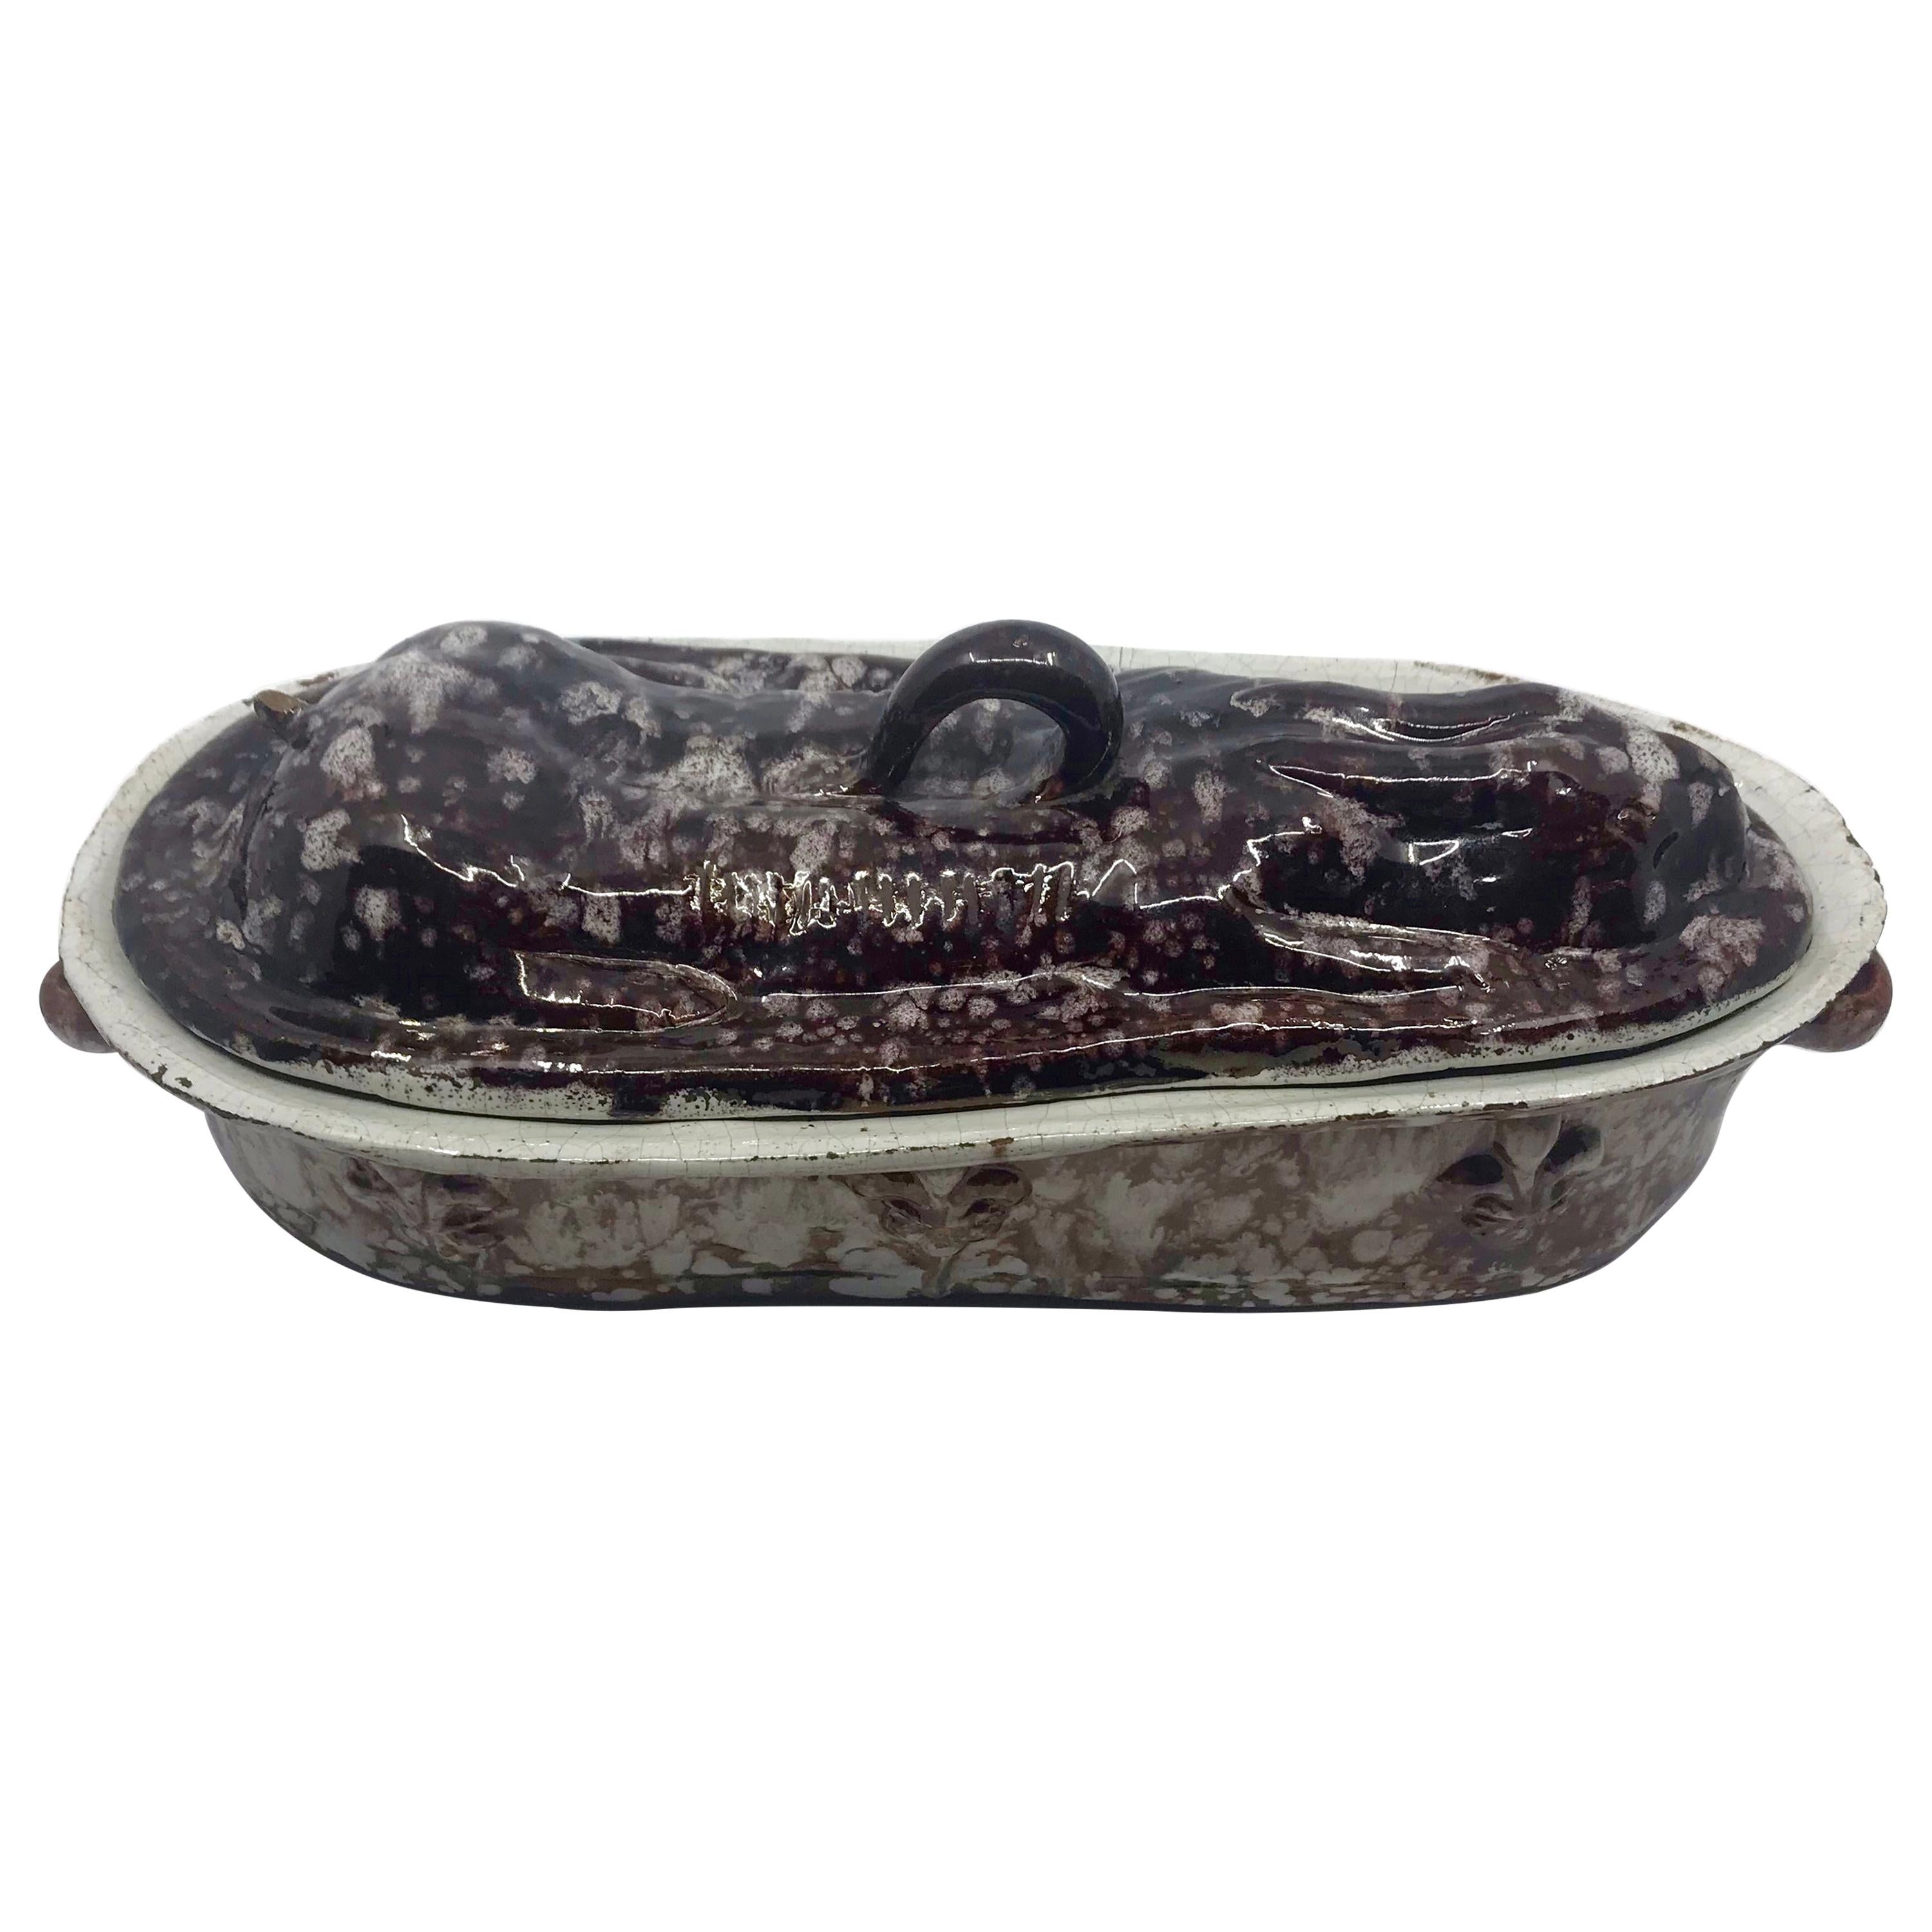 French rabbit tureen. Large glazed terracotta hare or rabbit tureen in mottled eggplant tones with hand-molded base with six raised Fleur de Lis and ribbon handles with molded lid fashioned in the form of a recumbent hare or rabbit with handle,